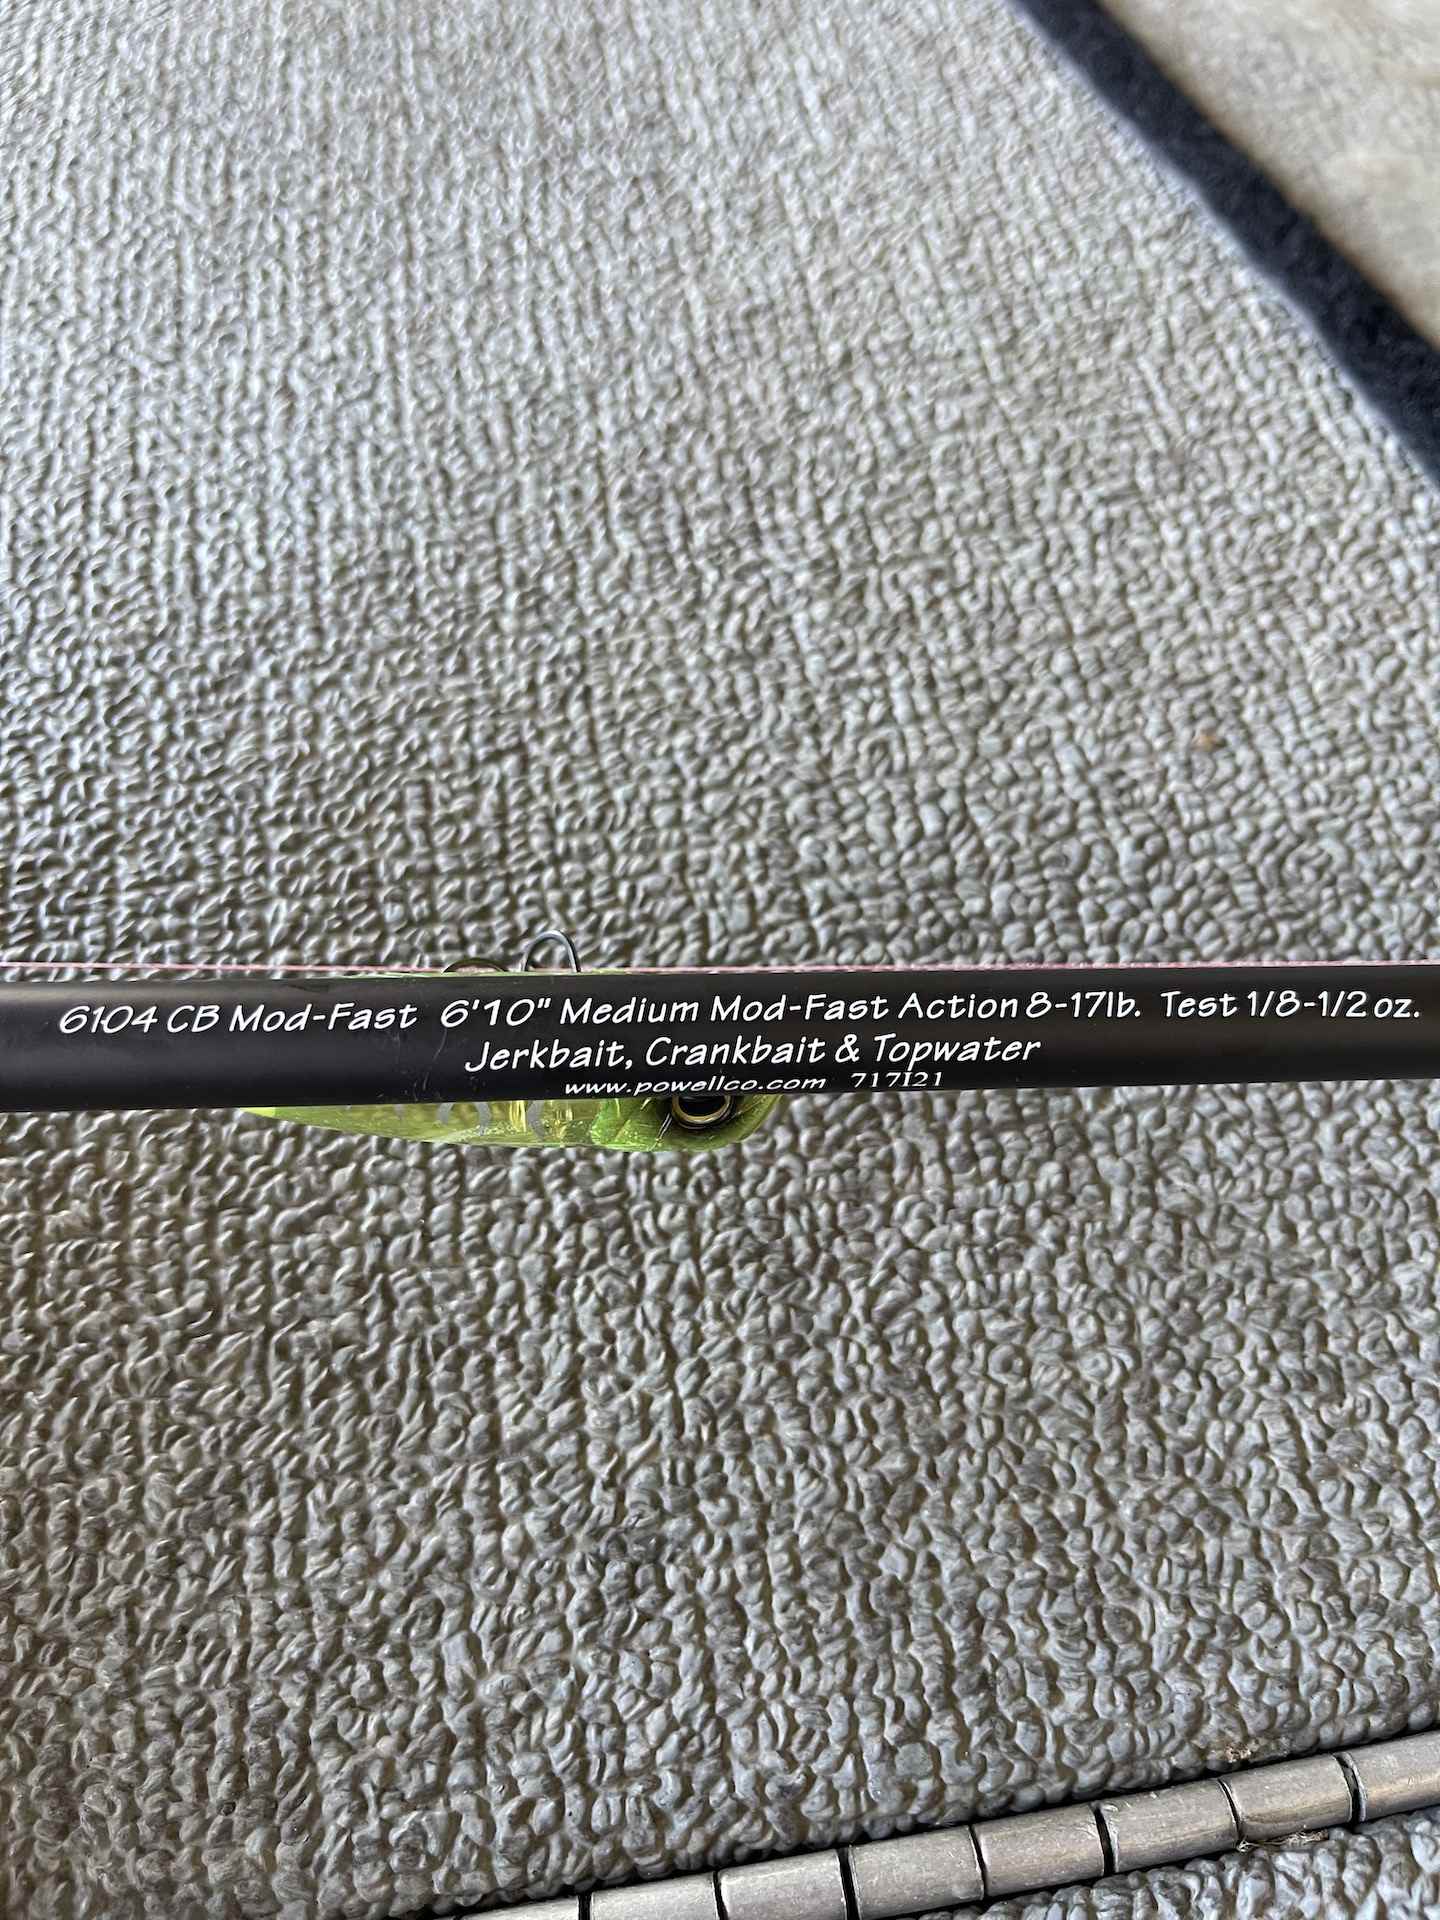 New Top Water Rod You Bought This Year ? - Fishing Rods, Reels, Line, and  Knots - Bass Fishing Forums